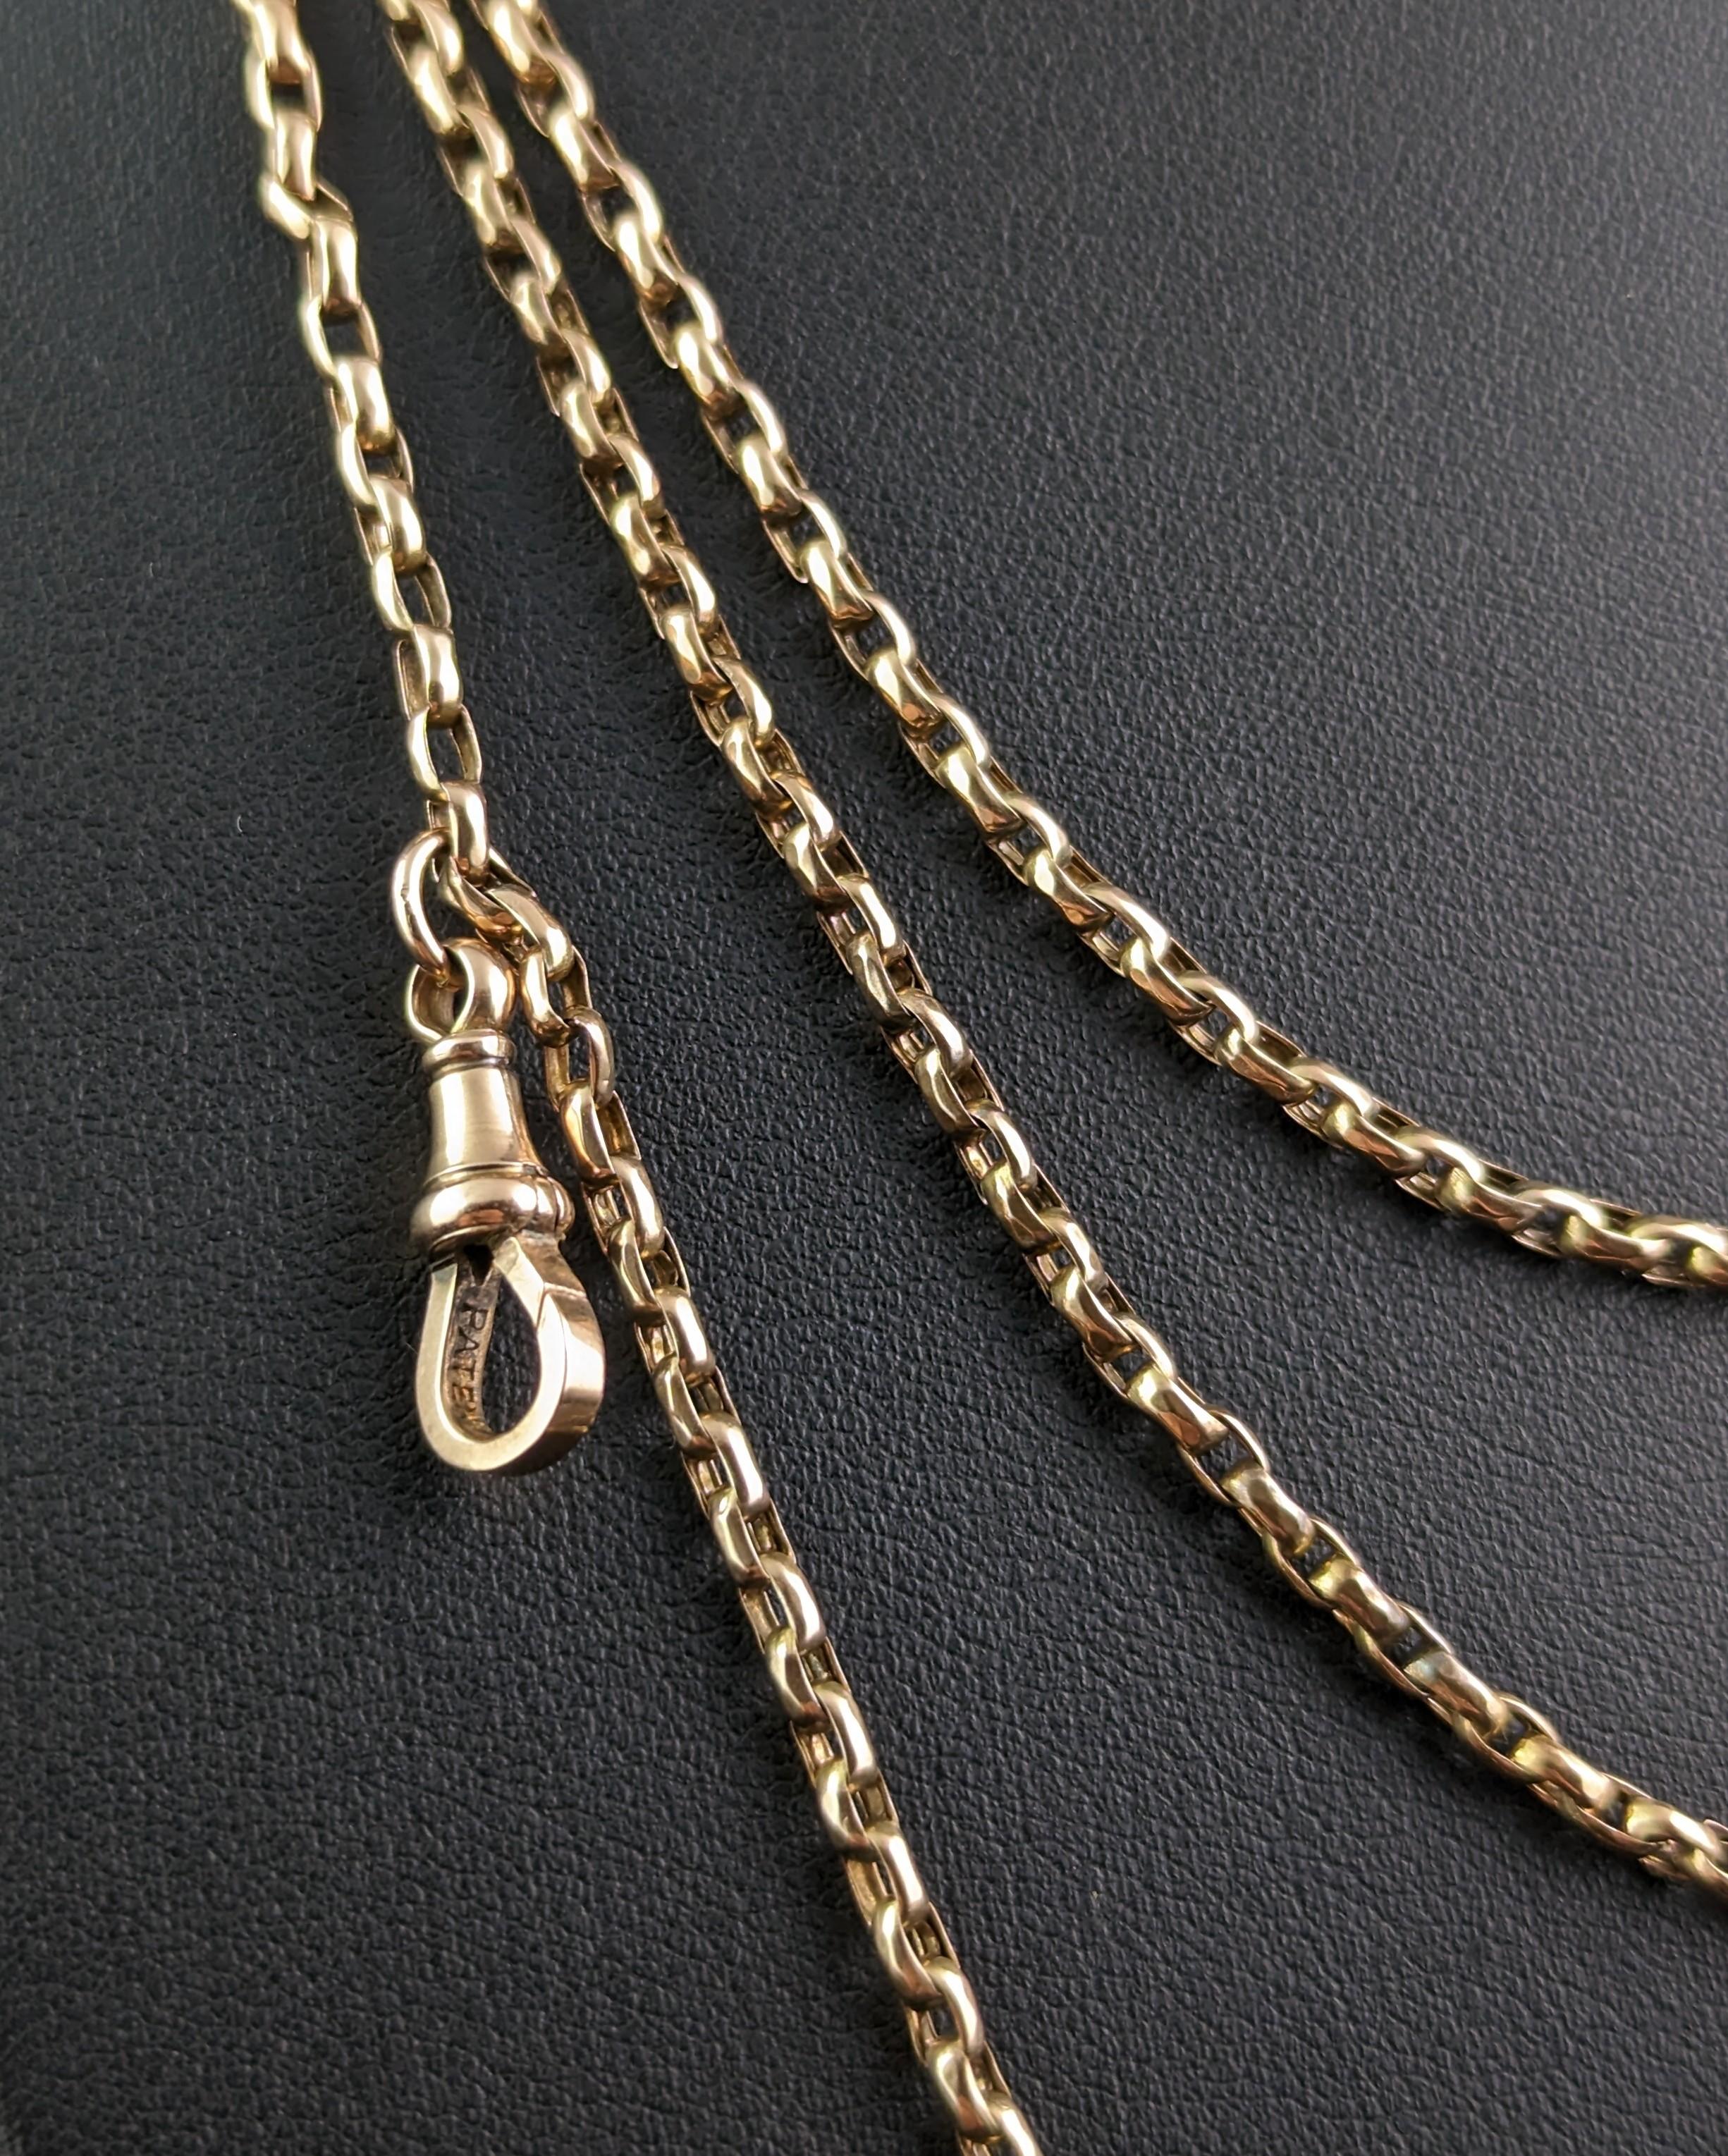 Antique 9k Yellow Gold Longuard Chain Necklace, Muff Chain 6